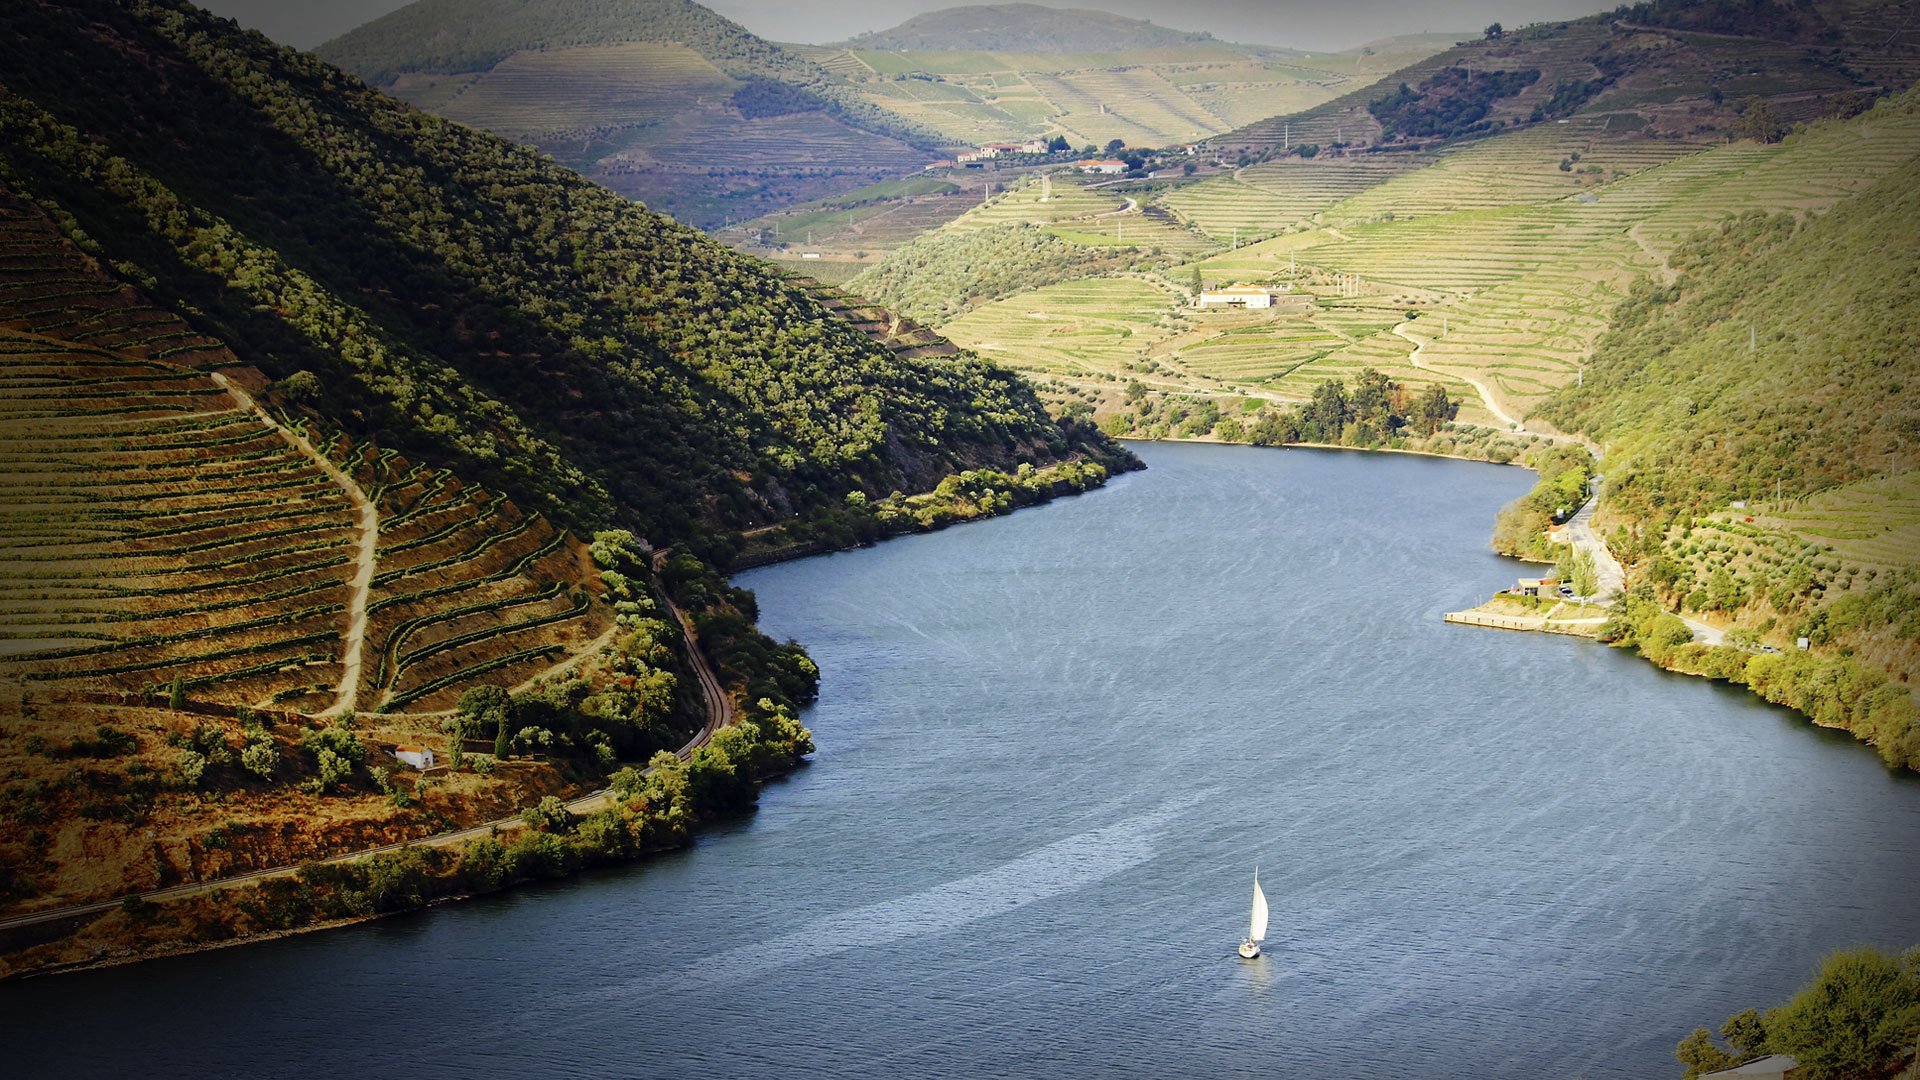 5-Day Tour in Douro with a Sailing Cruise in Douro River